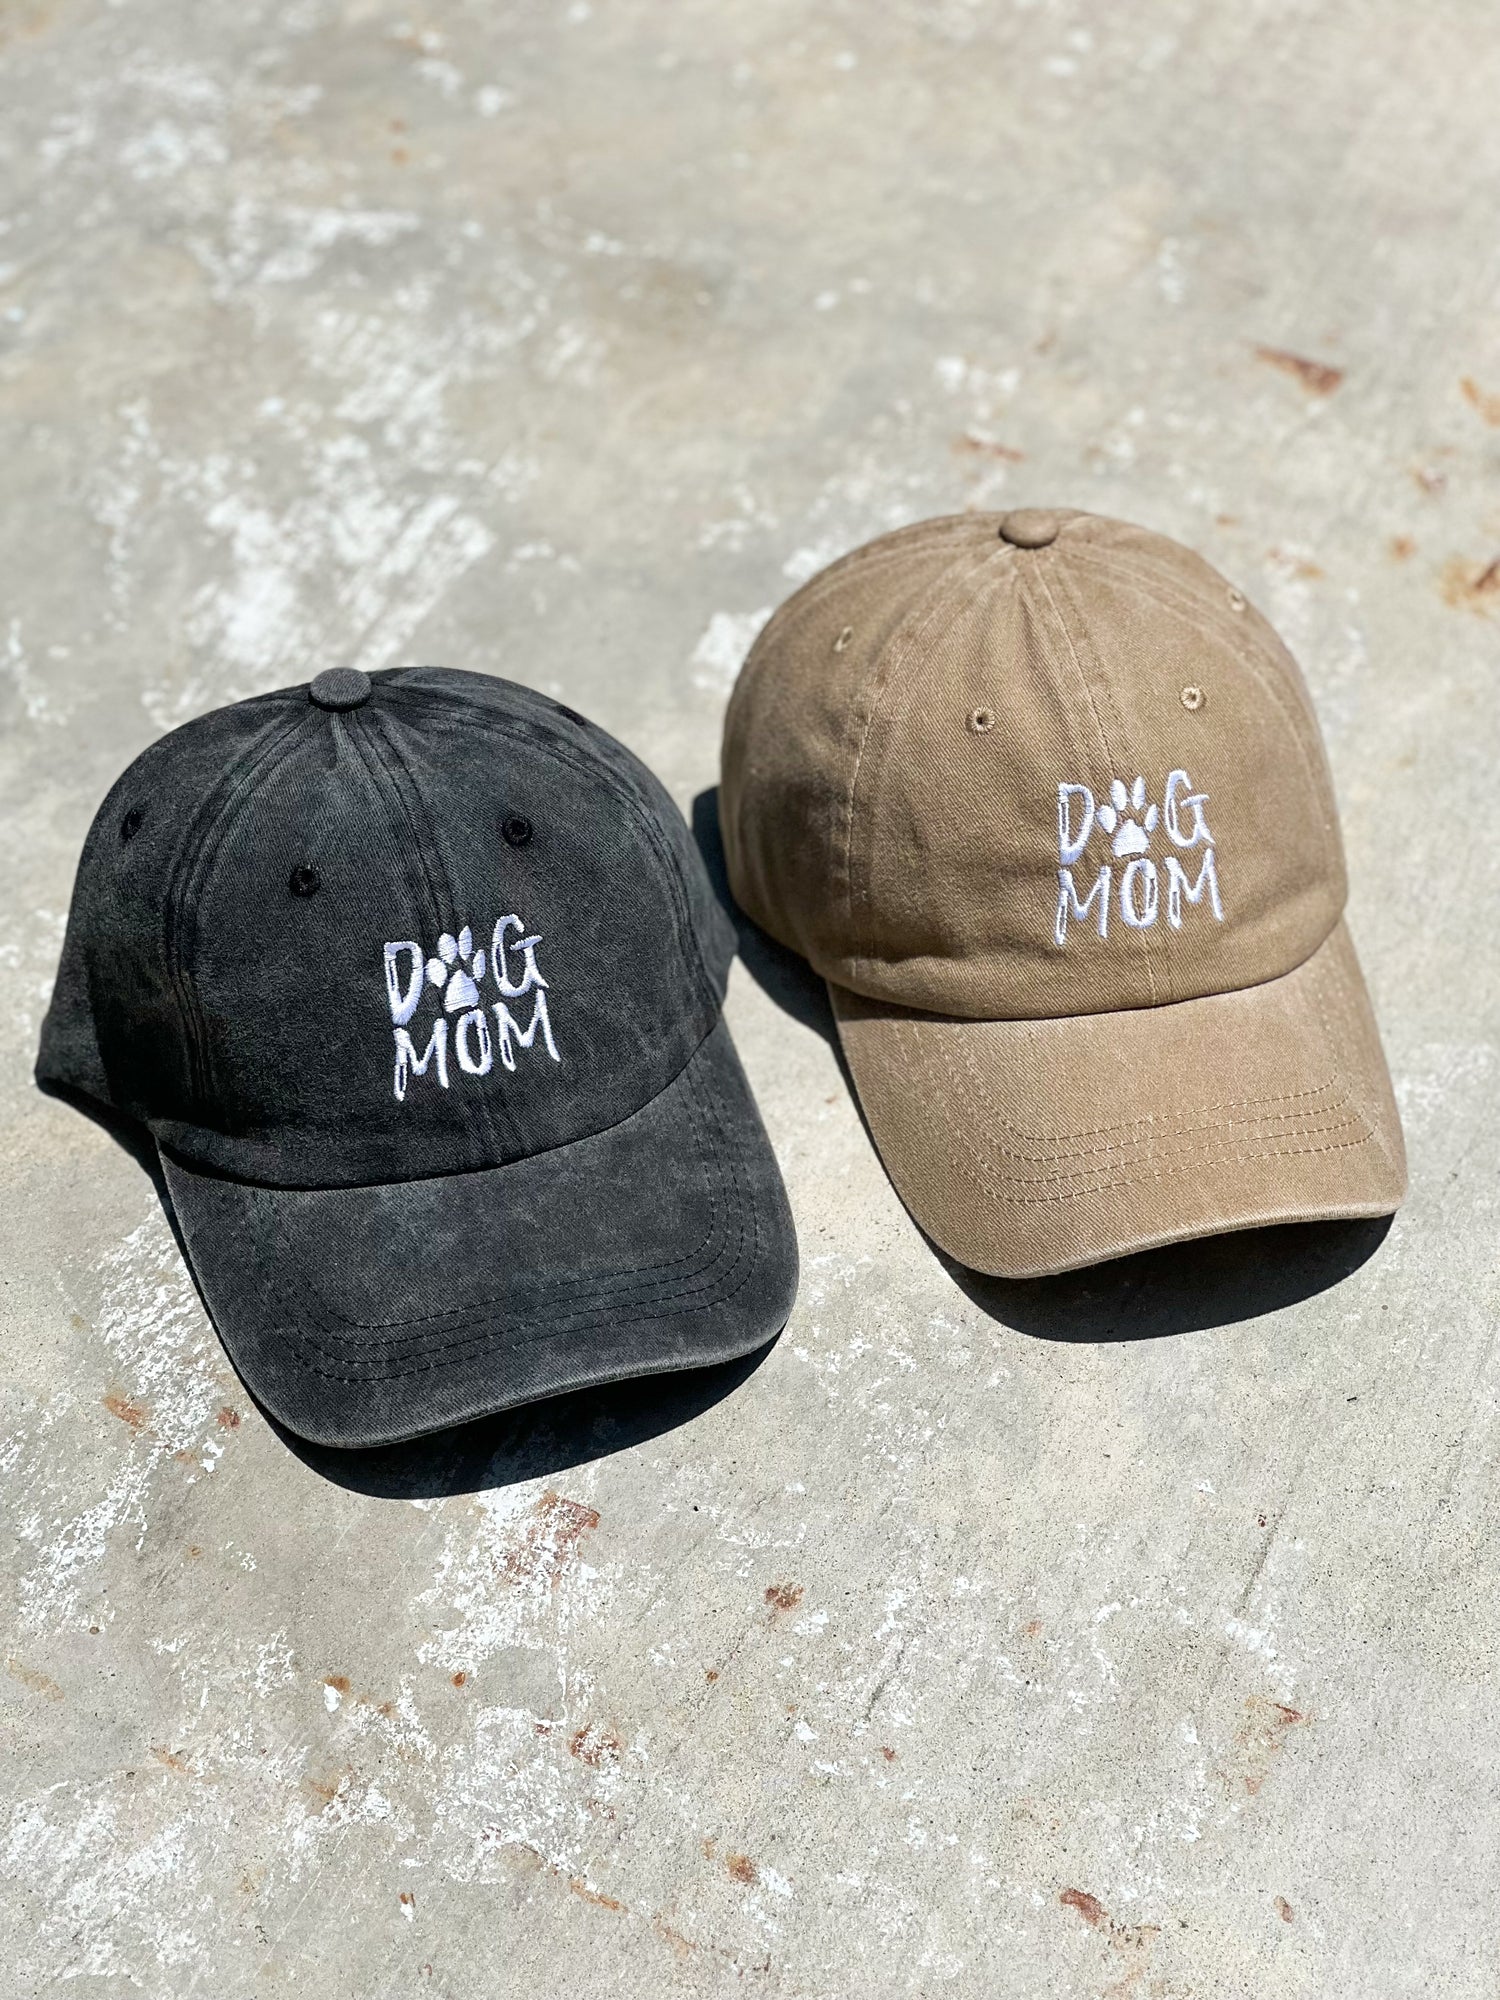 There is two baseball caps on a concrete gray floor. One baseball cap is charcoal black and has "dog mom" printed on the front. Next to it is a beige nude baseball cap with a "Dog Mom" print on it in the front. 